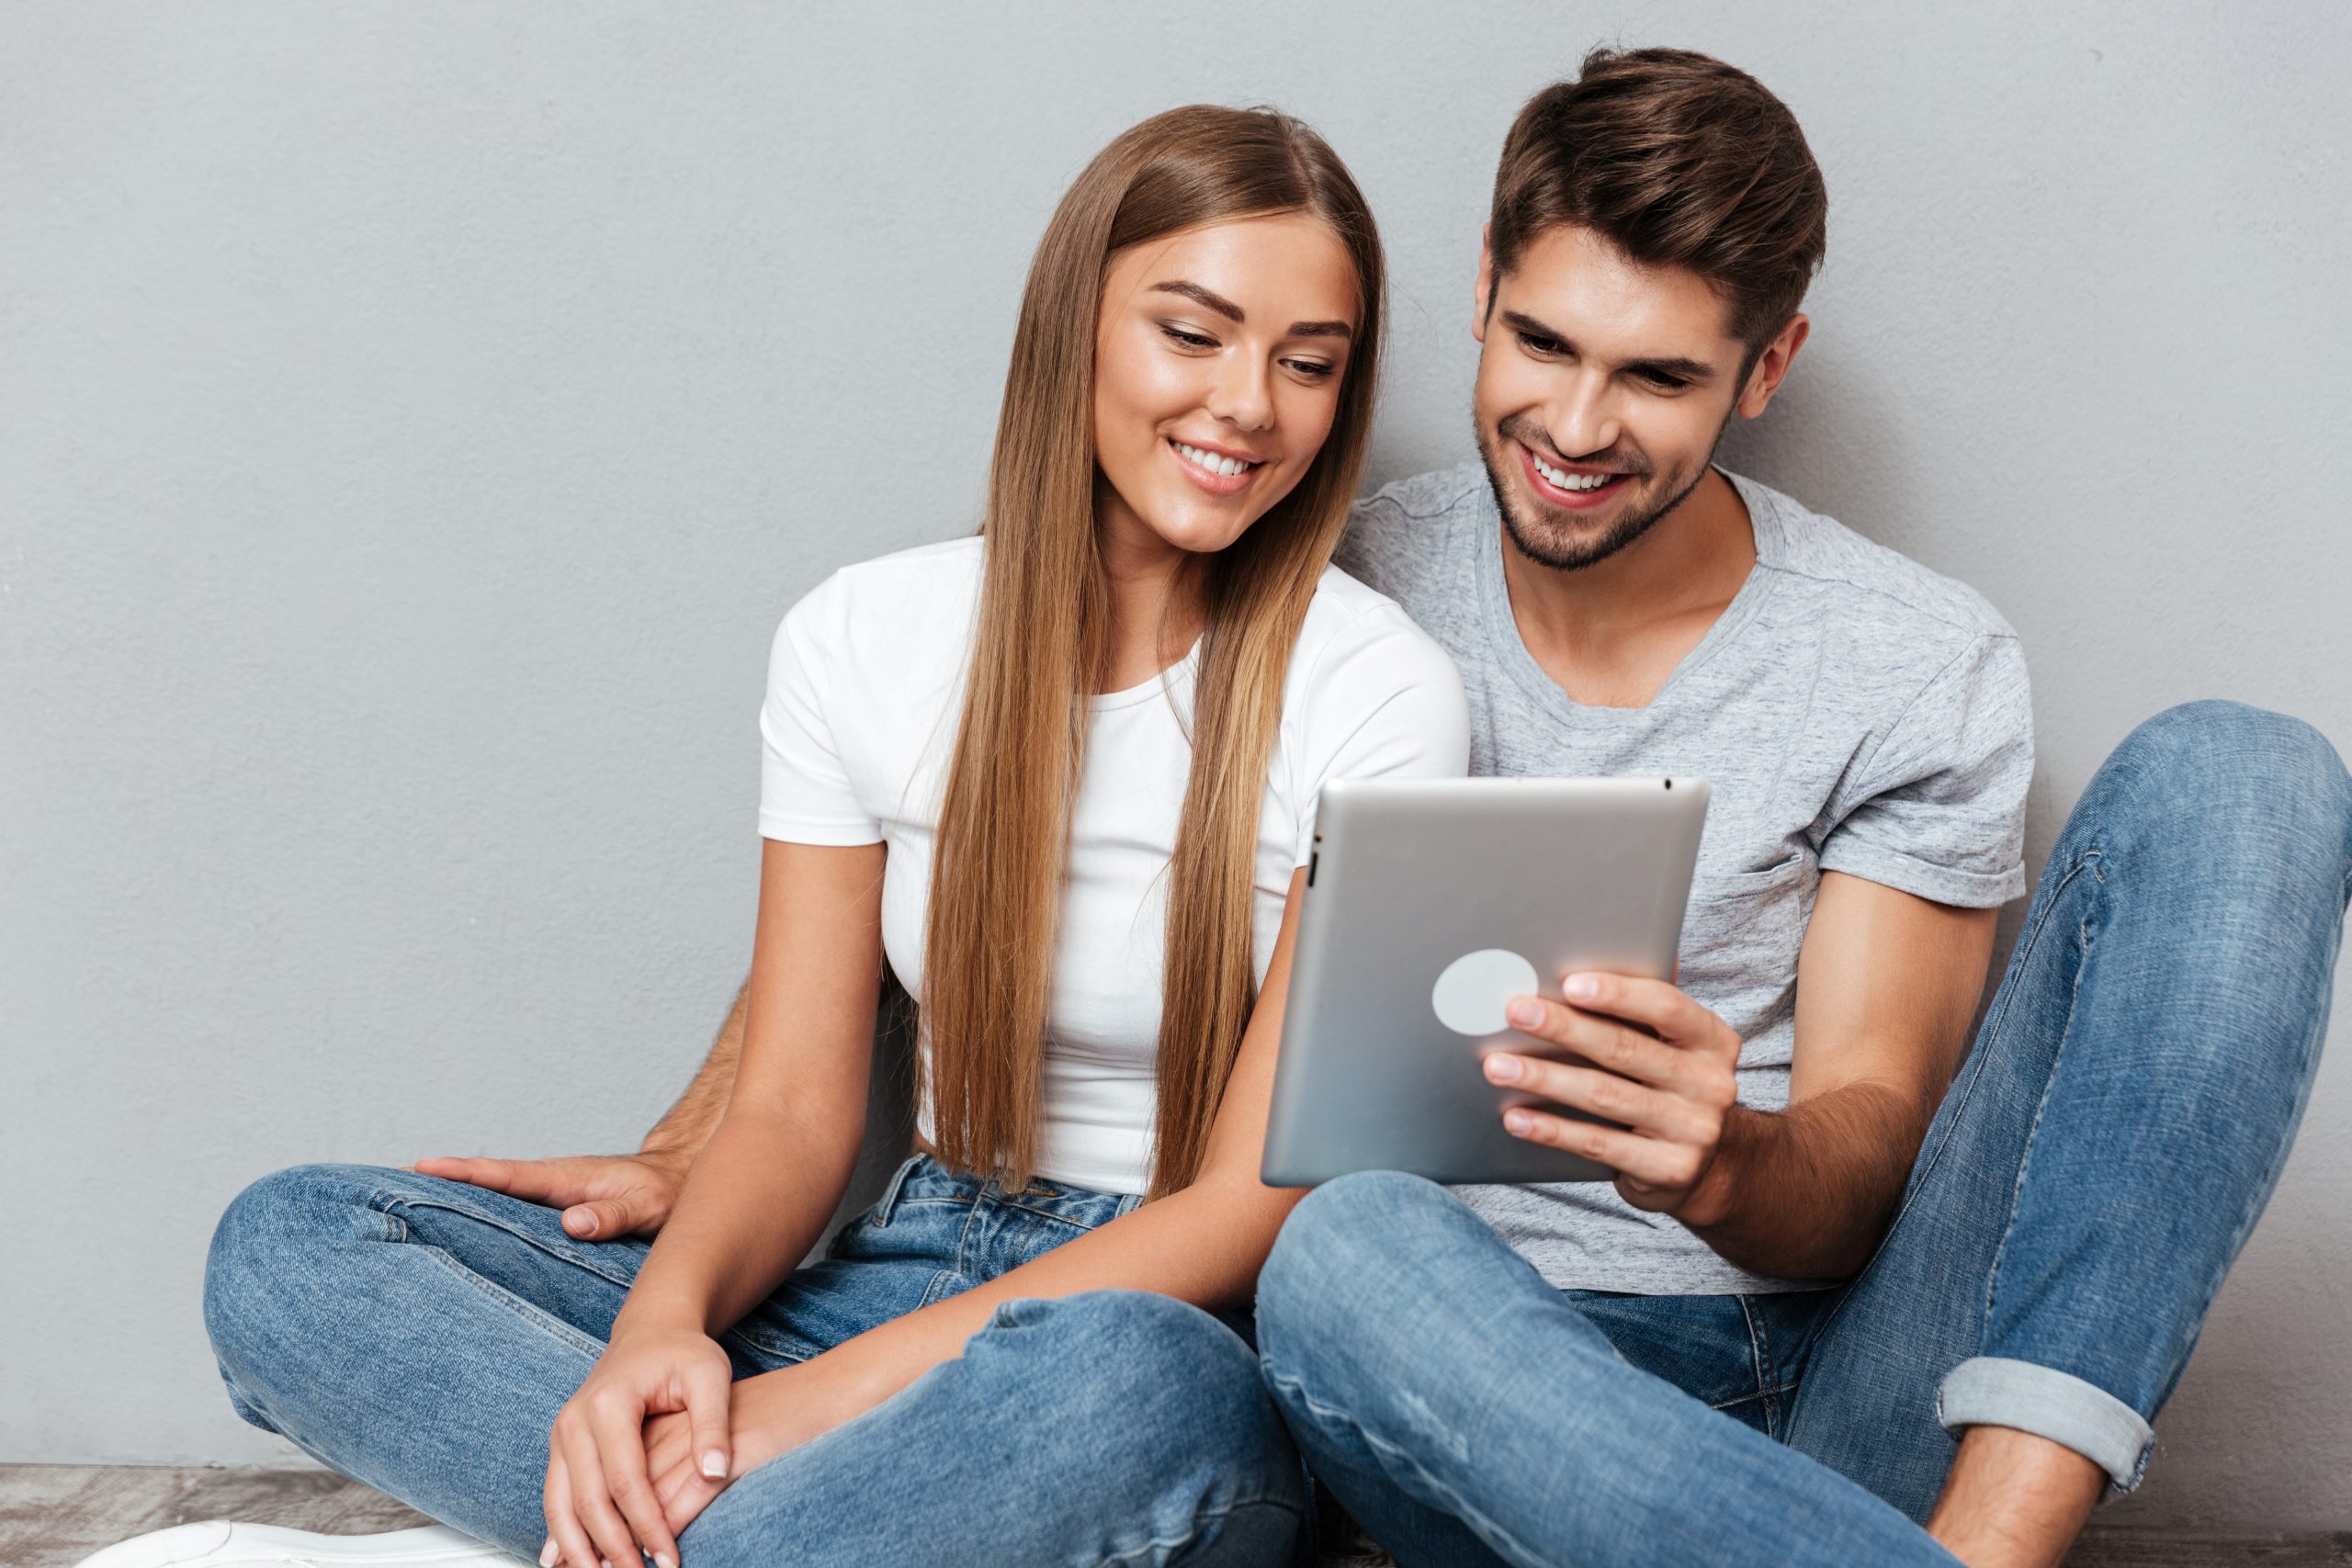 Woman and Man in jeans sitting on floor reviewing something on a tablet